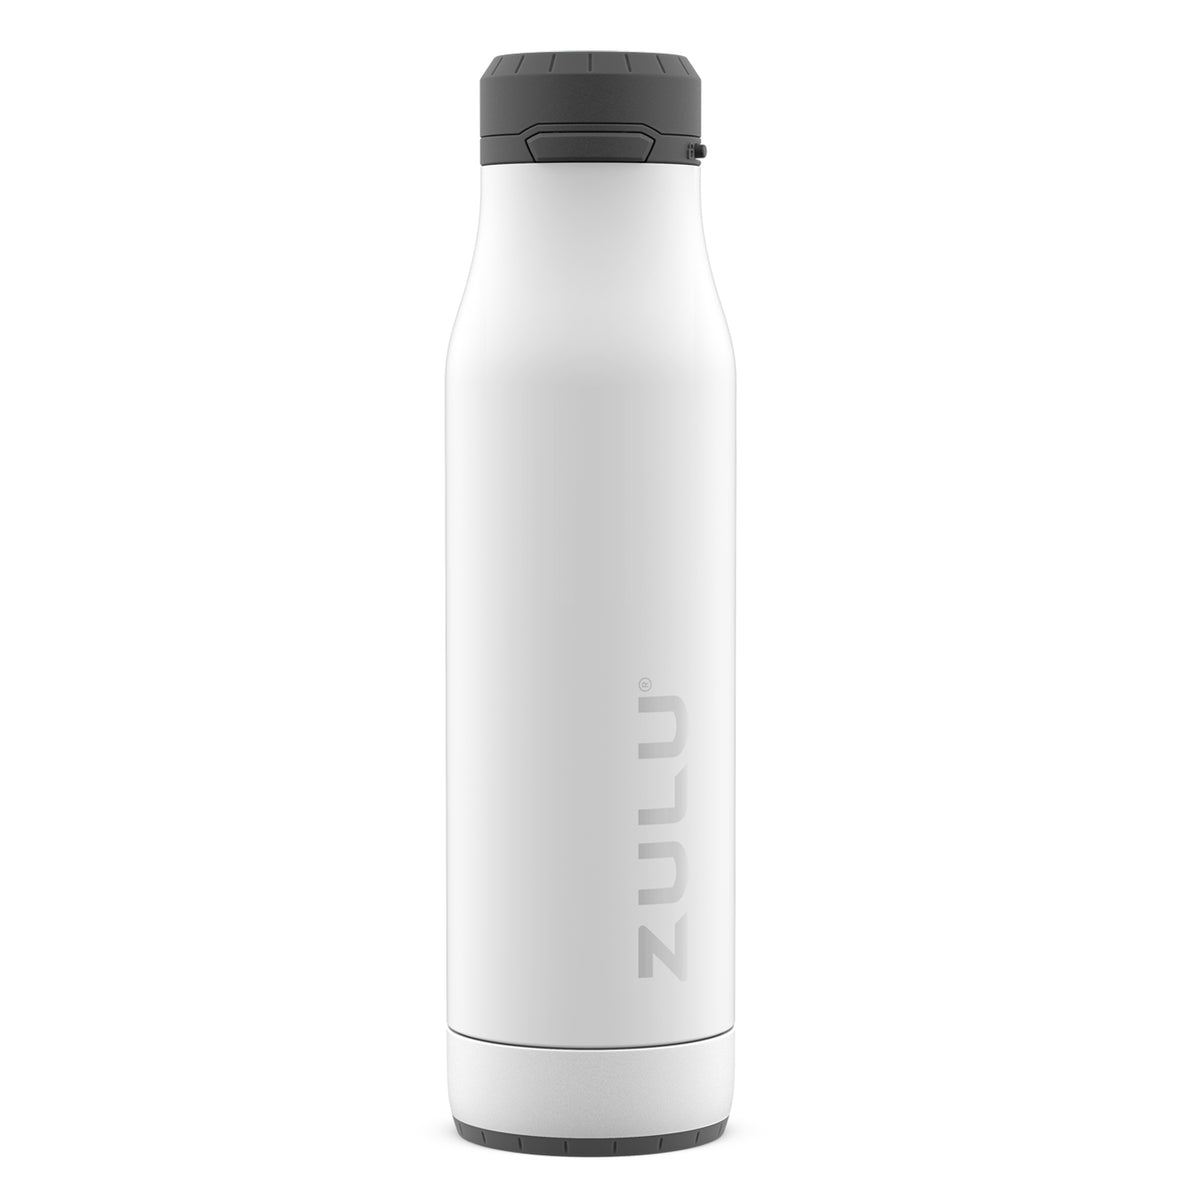 ZULU Swift 32 fluid ounces Stainless Steel Vacuum Insulated Water Bottle  with Silicone Straw, Taffy